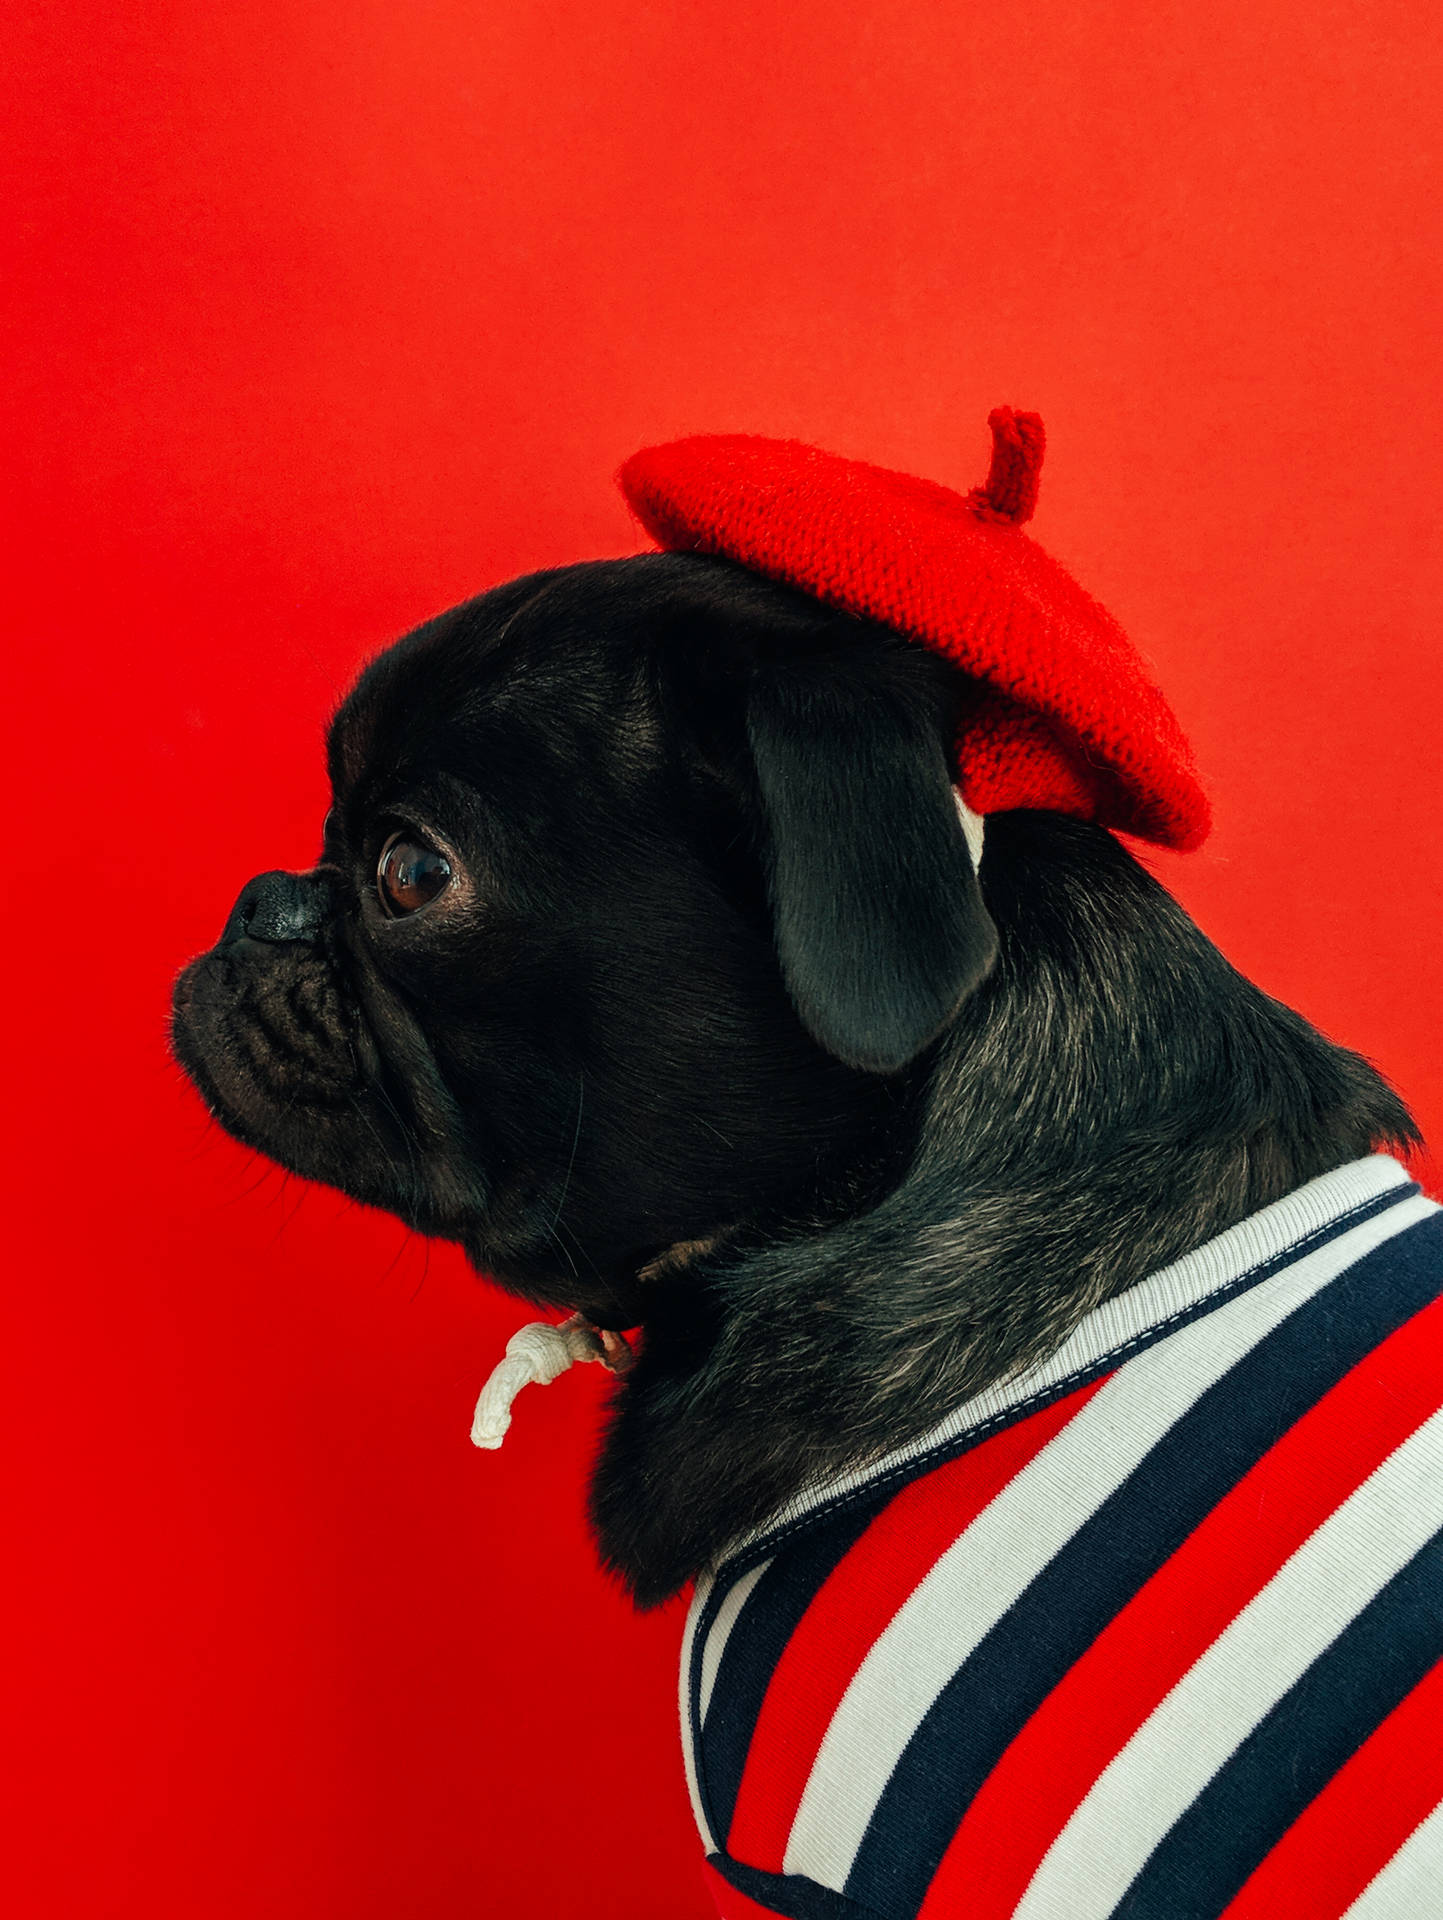 This Little Red Pug Is Ready To Play Background